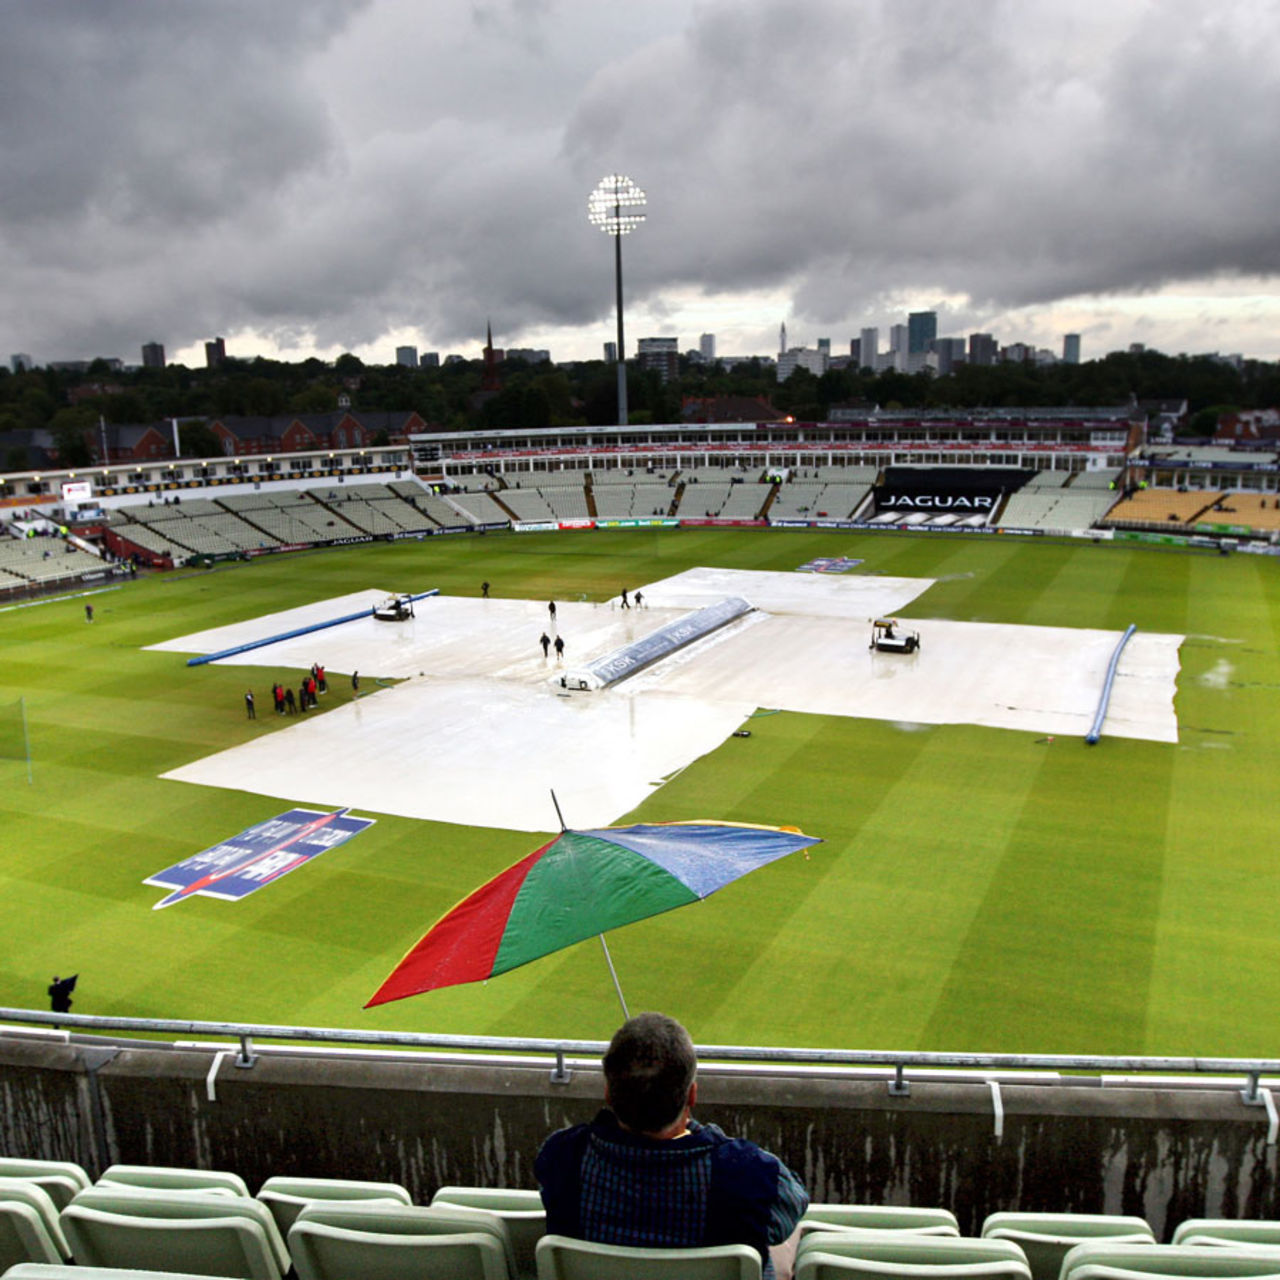 The covers were again in action at Edgbaston, England v South Africa, 3rd T20 international, Edgbaston, September 12, 2012